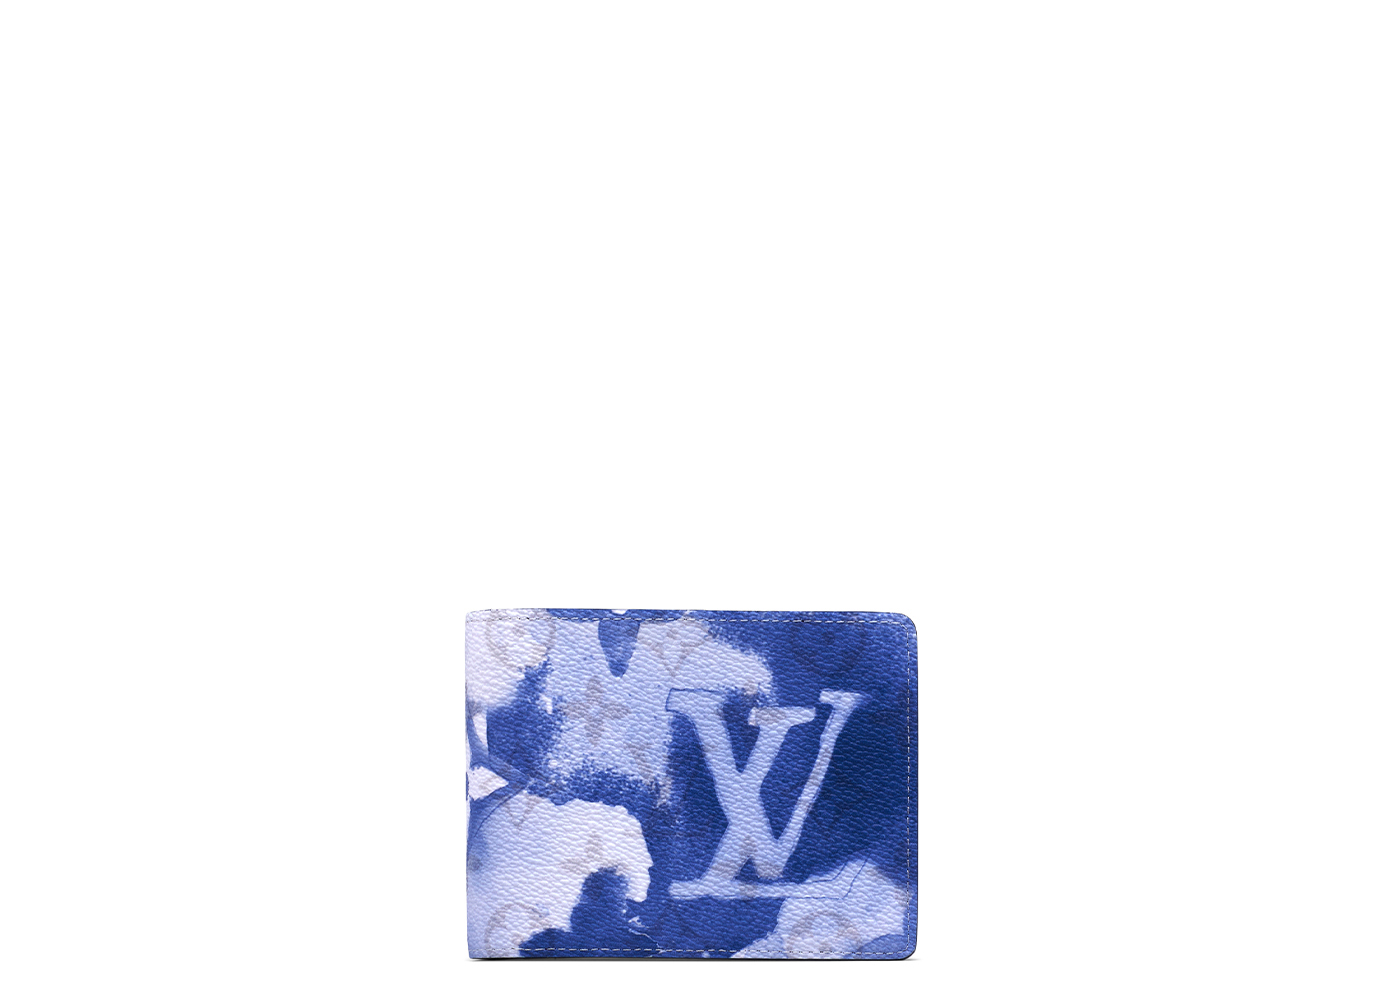 Brazza Wallet Monogram Other  Wallets and Small Leather Goods  LOUIS  VUITTON